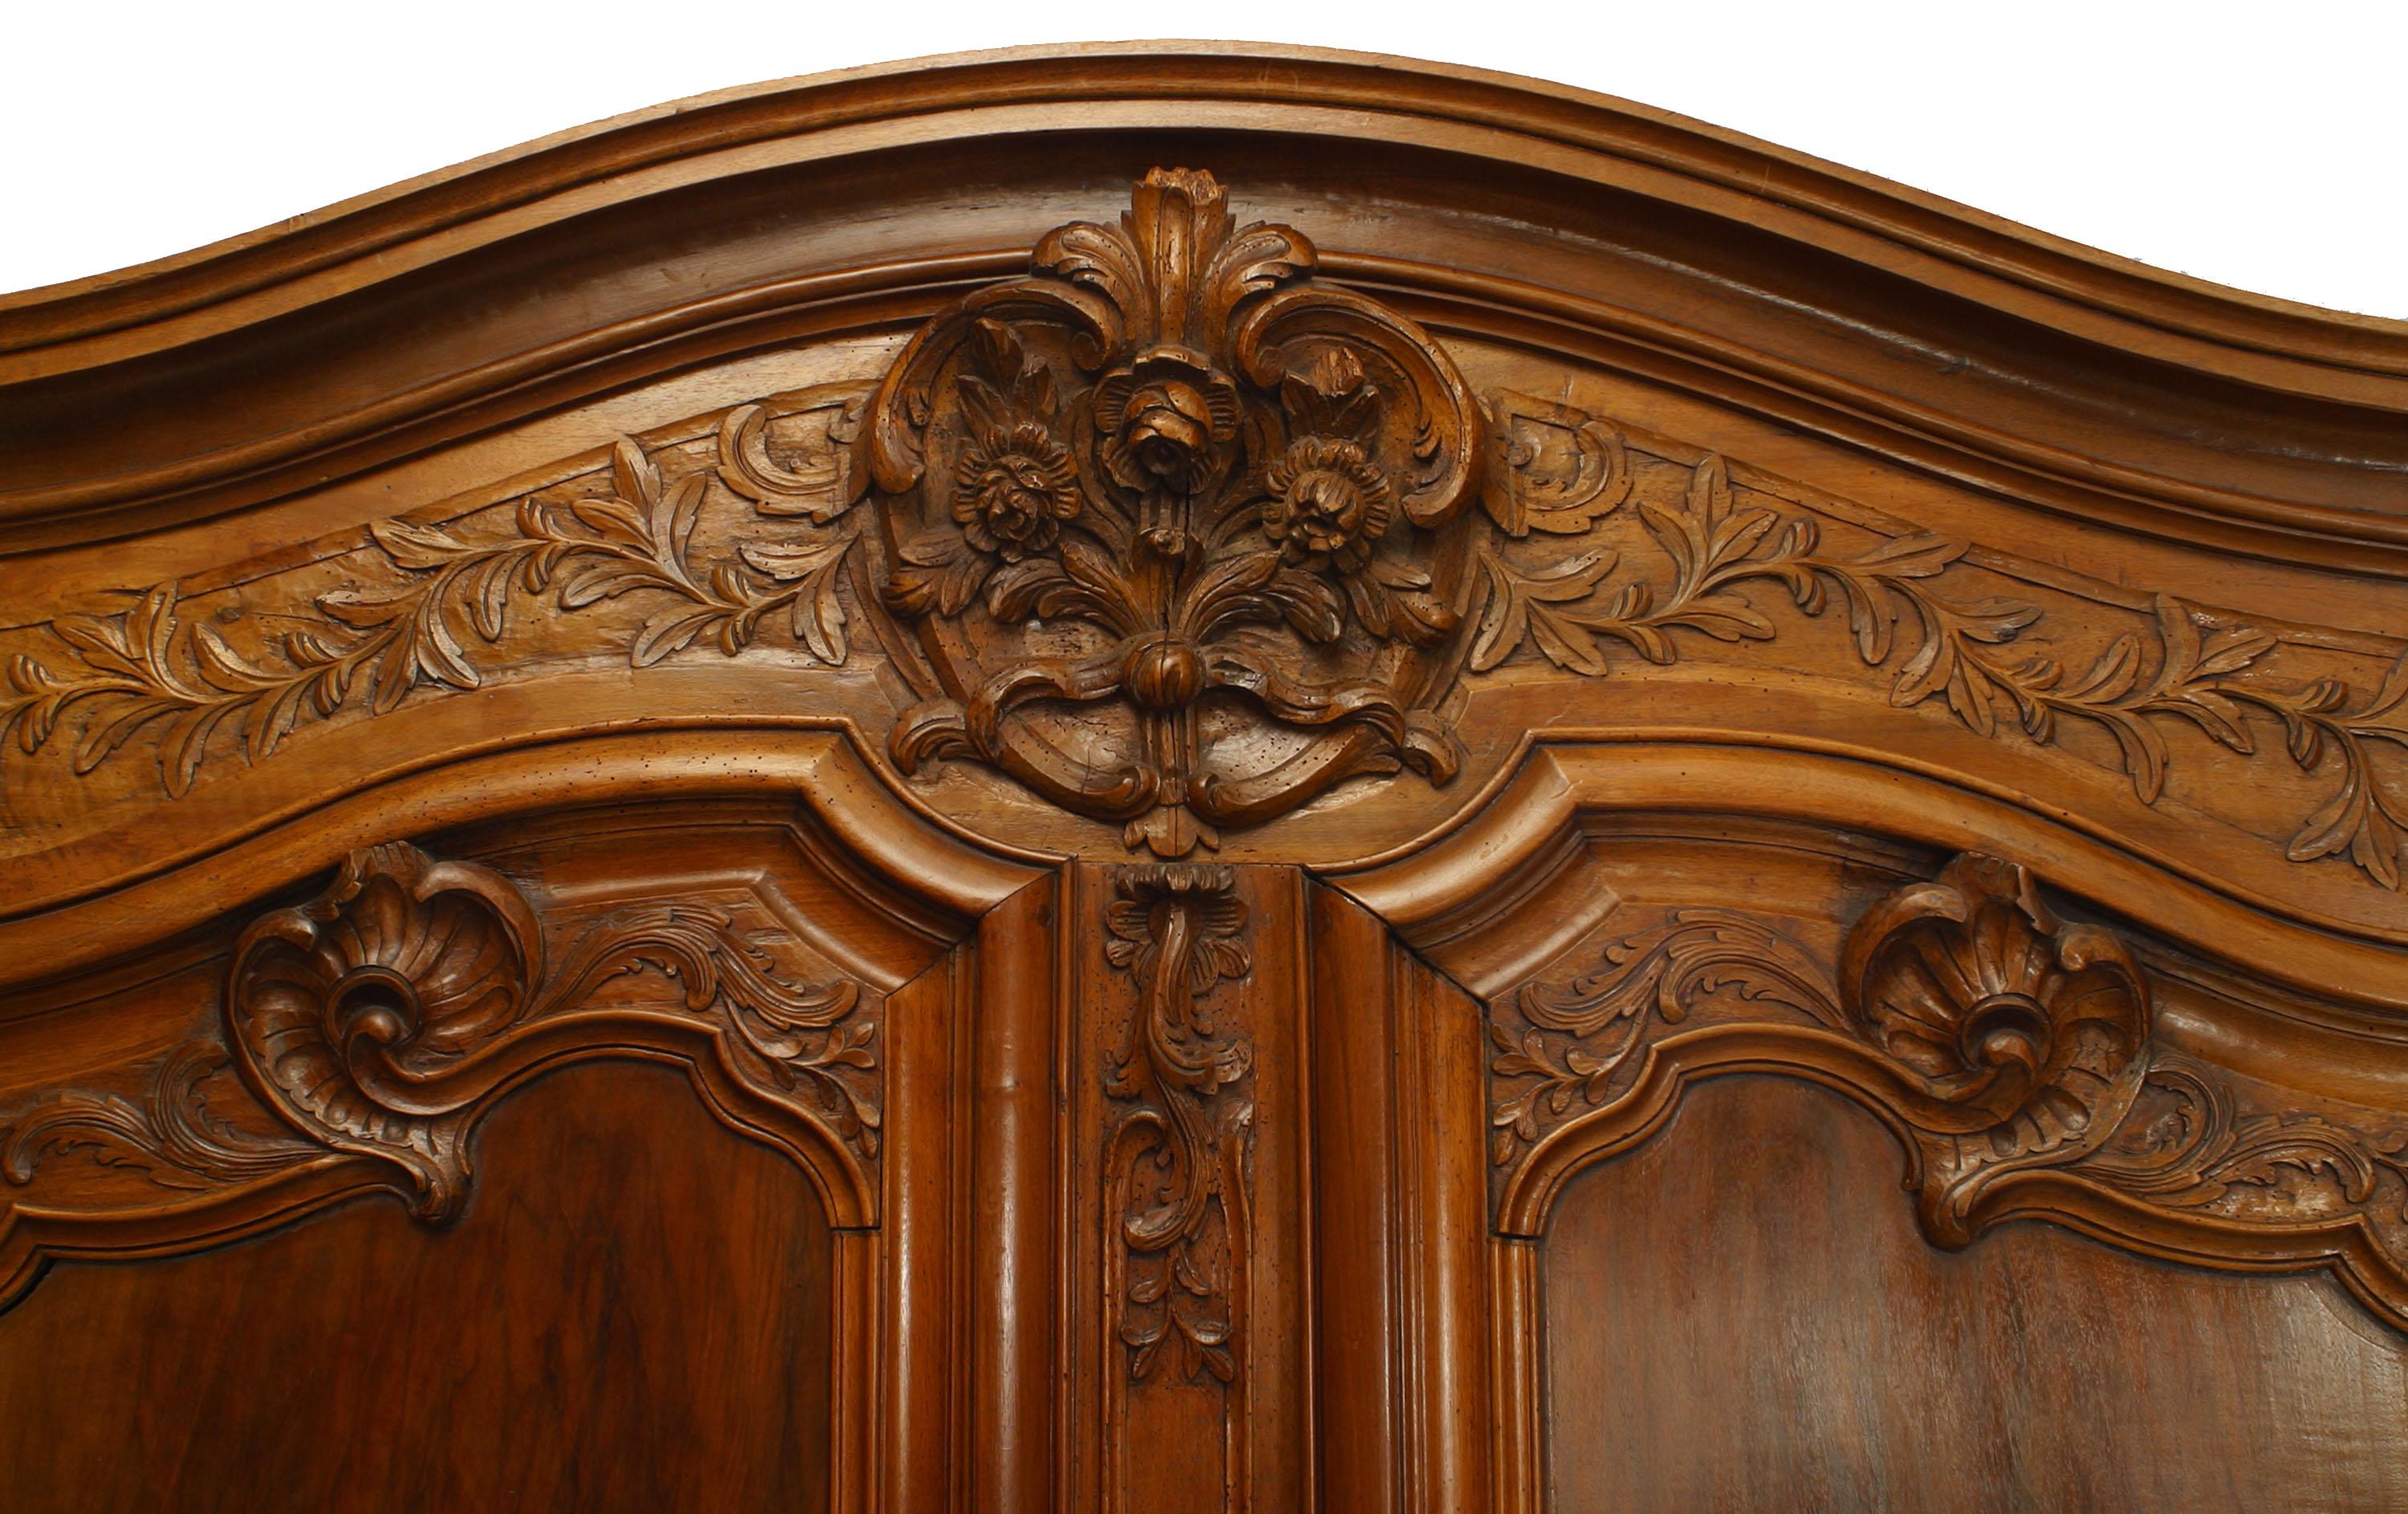 French Provincial 18th century walnut two door large scale armoire with foliate carved detail on doors and cornice with original hardware supported on a flat base.